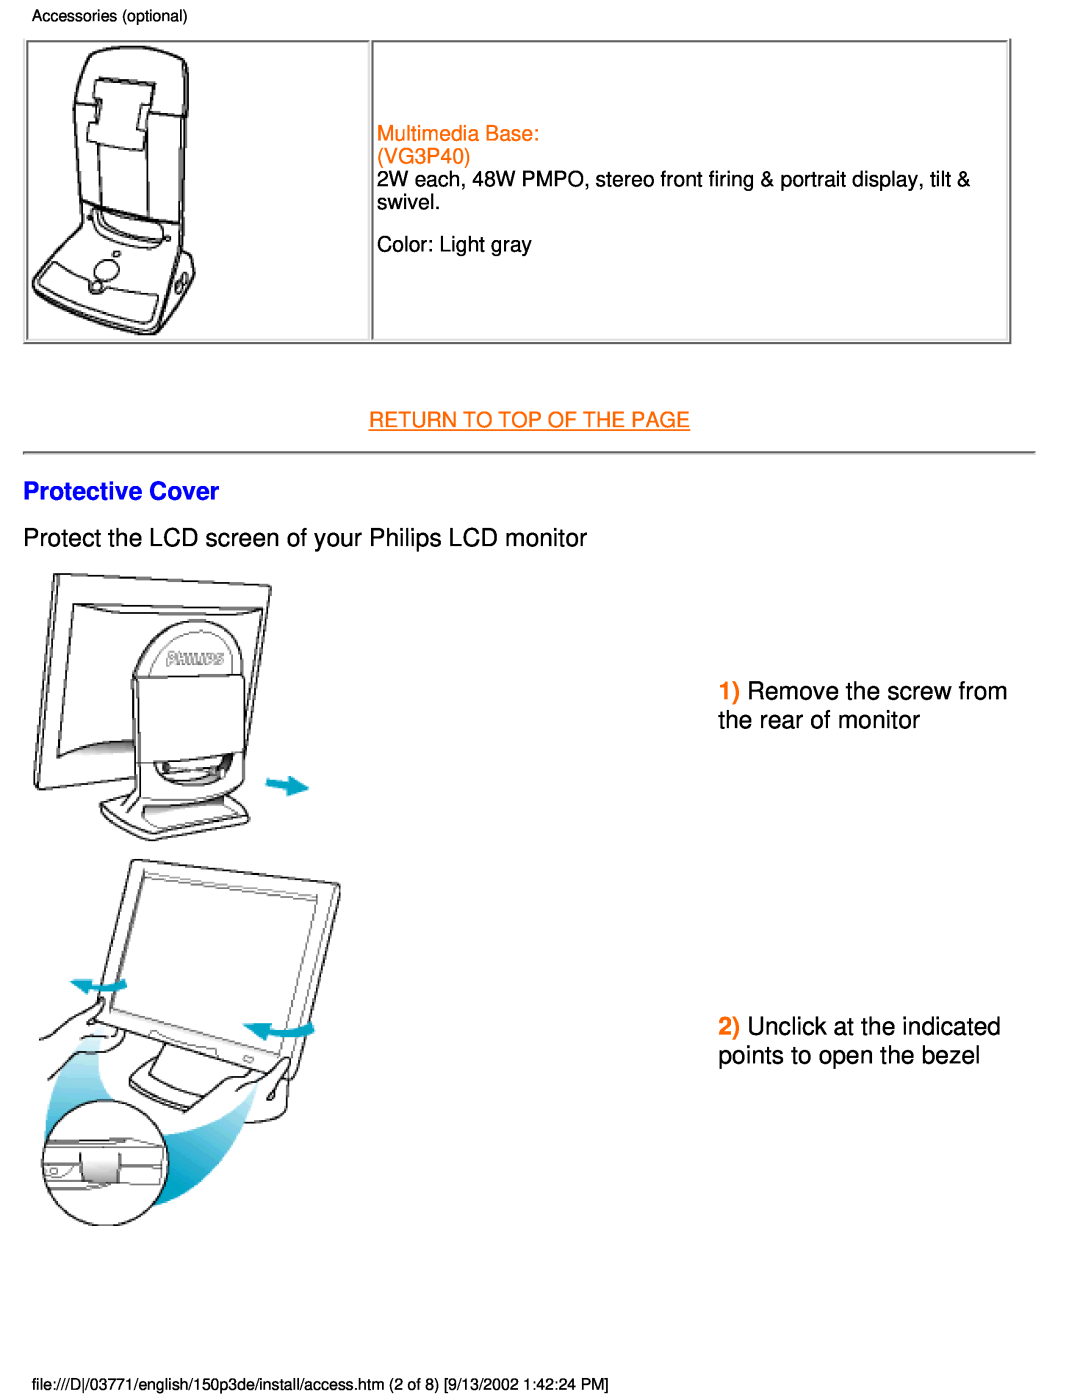 Philips 150P3E user manual Protective Cover, Protect the LCD screen of your Philips LCD monitor, Multimedia Base VG3P40 